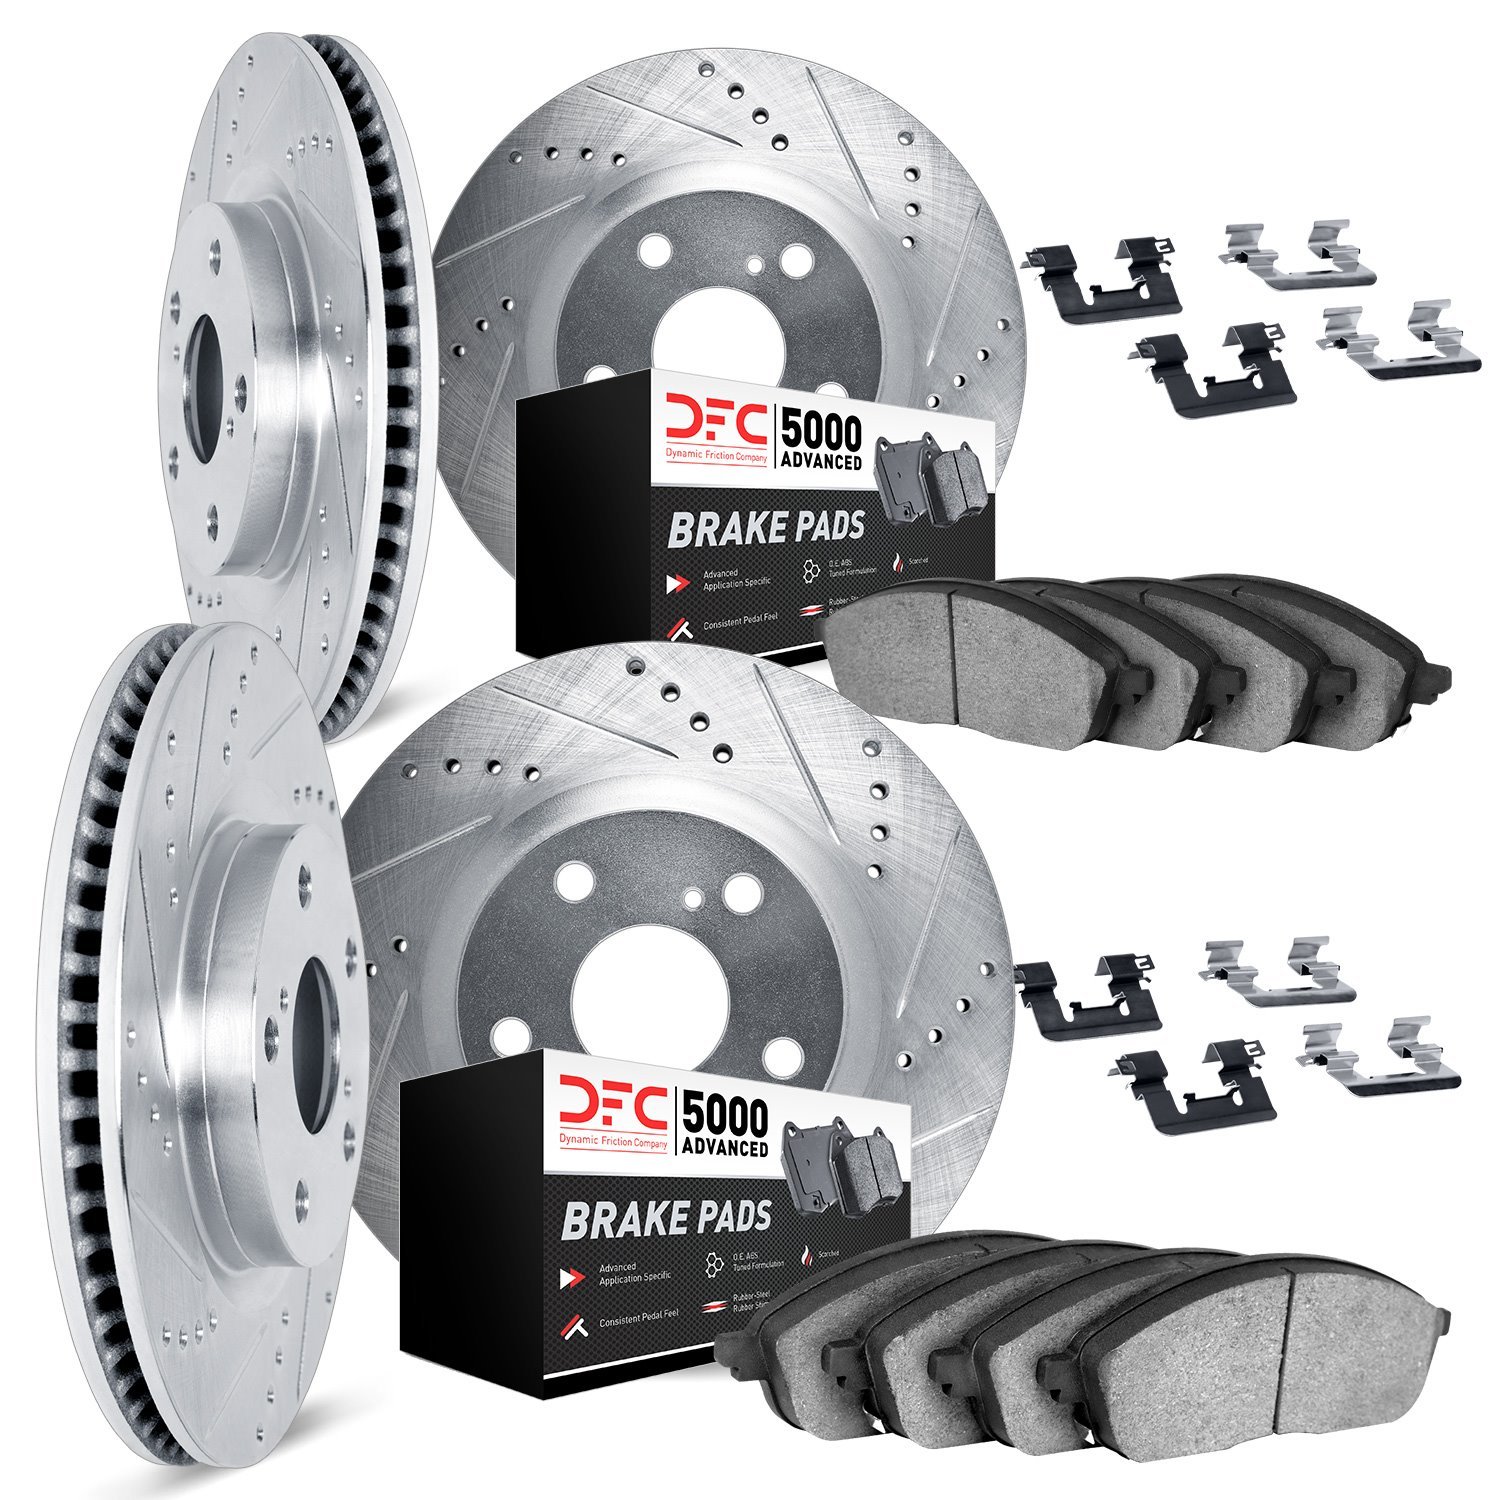 7514-11016 Drilled/Slotted Brake Rotors w/5000 Advanced Brake Pads Kit & Hardware [Silver], 2010-2016 Land Rover, Position: Fron